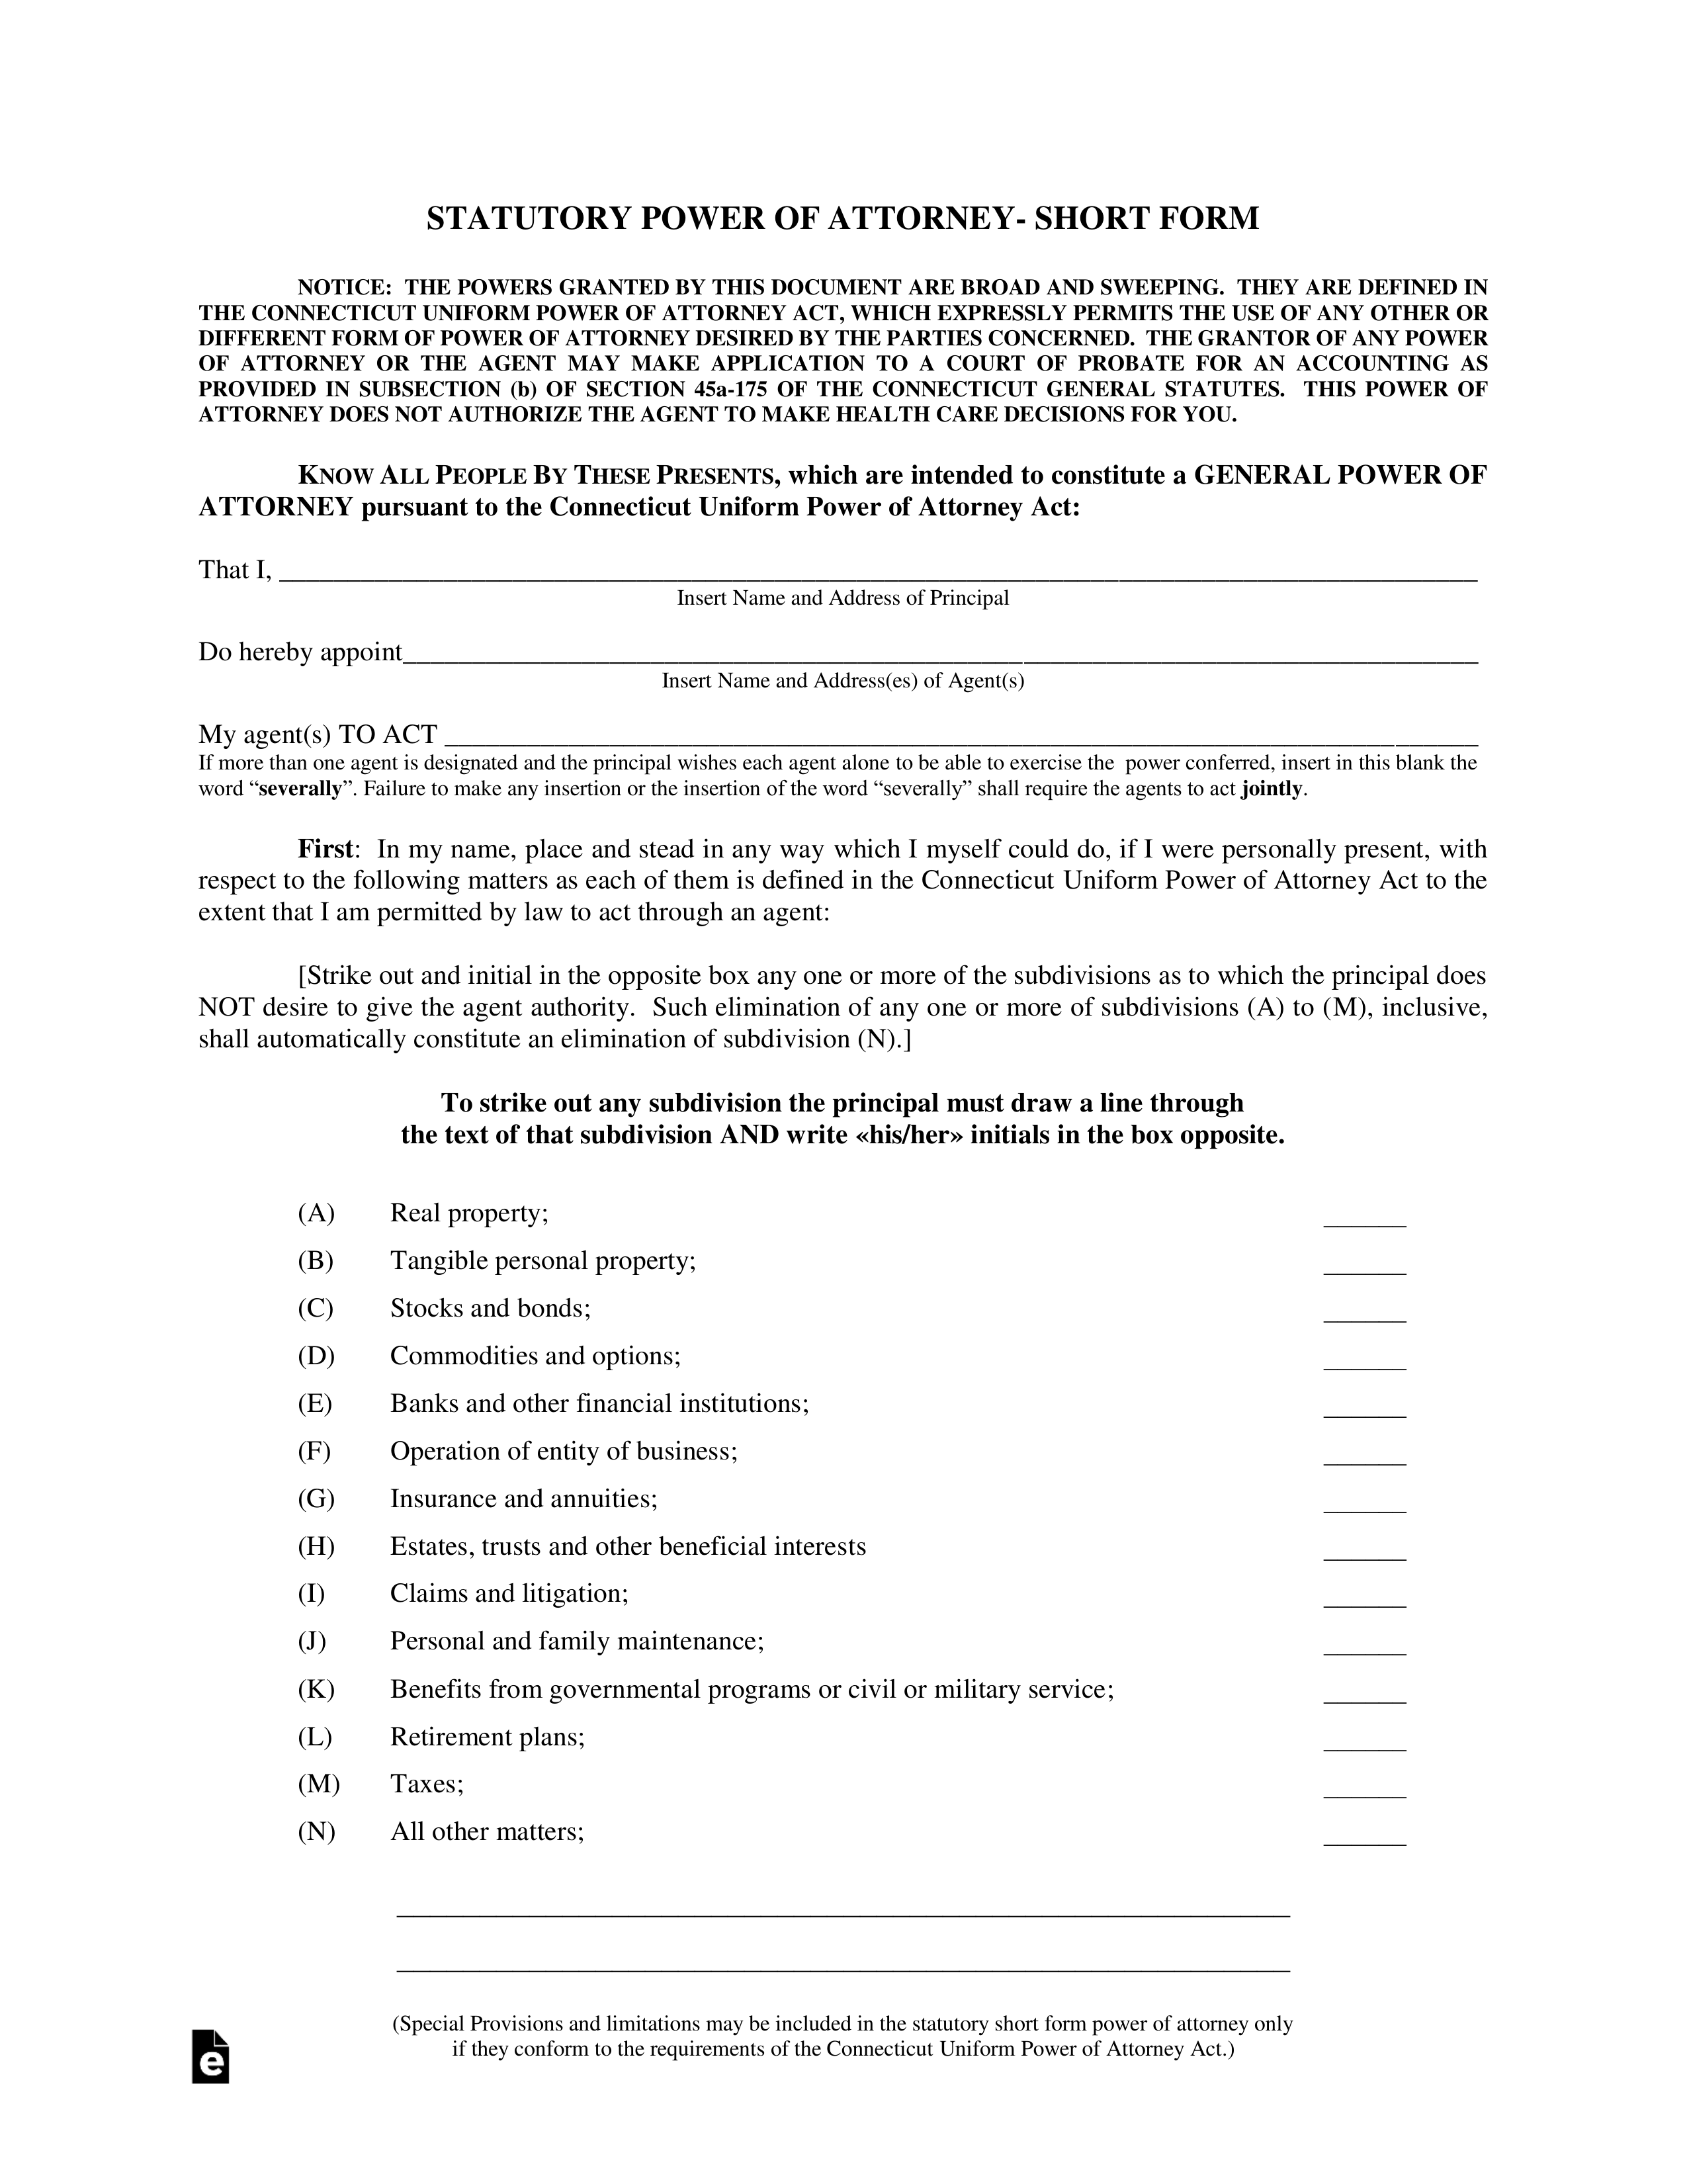 Connecticut Power of Attorney Forms (10 Types)